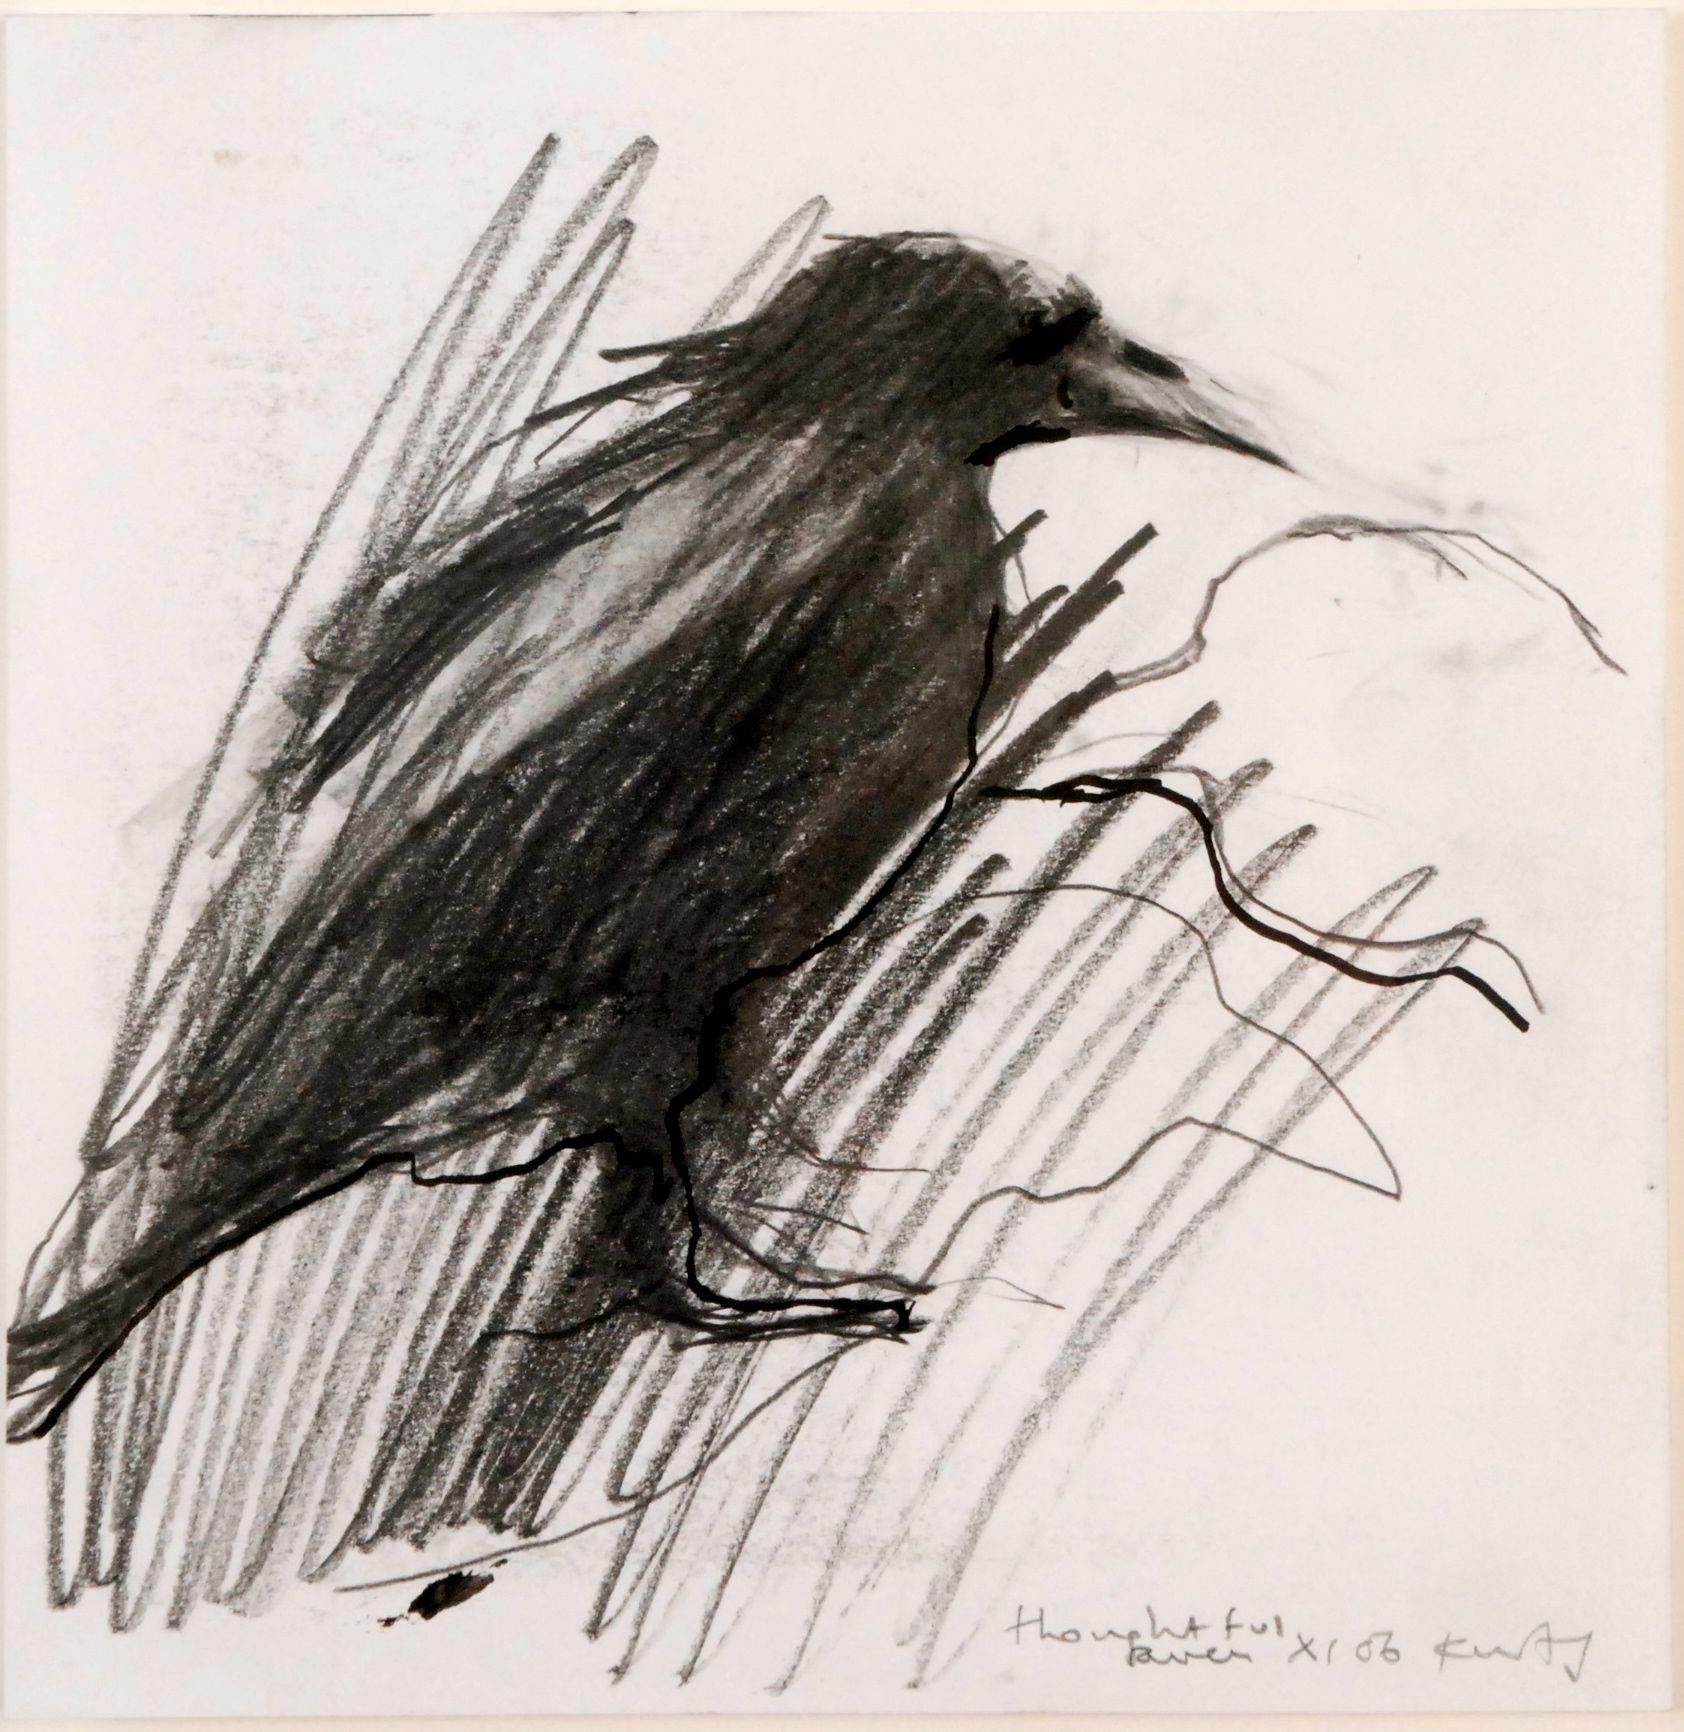 KURT JACKSON
Thoughtful raven
Charcoal and ink sketch
Signed inscribed and 
dated XI 06
Further